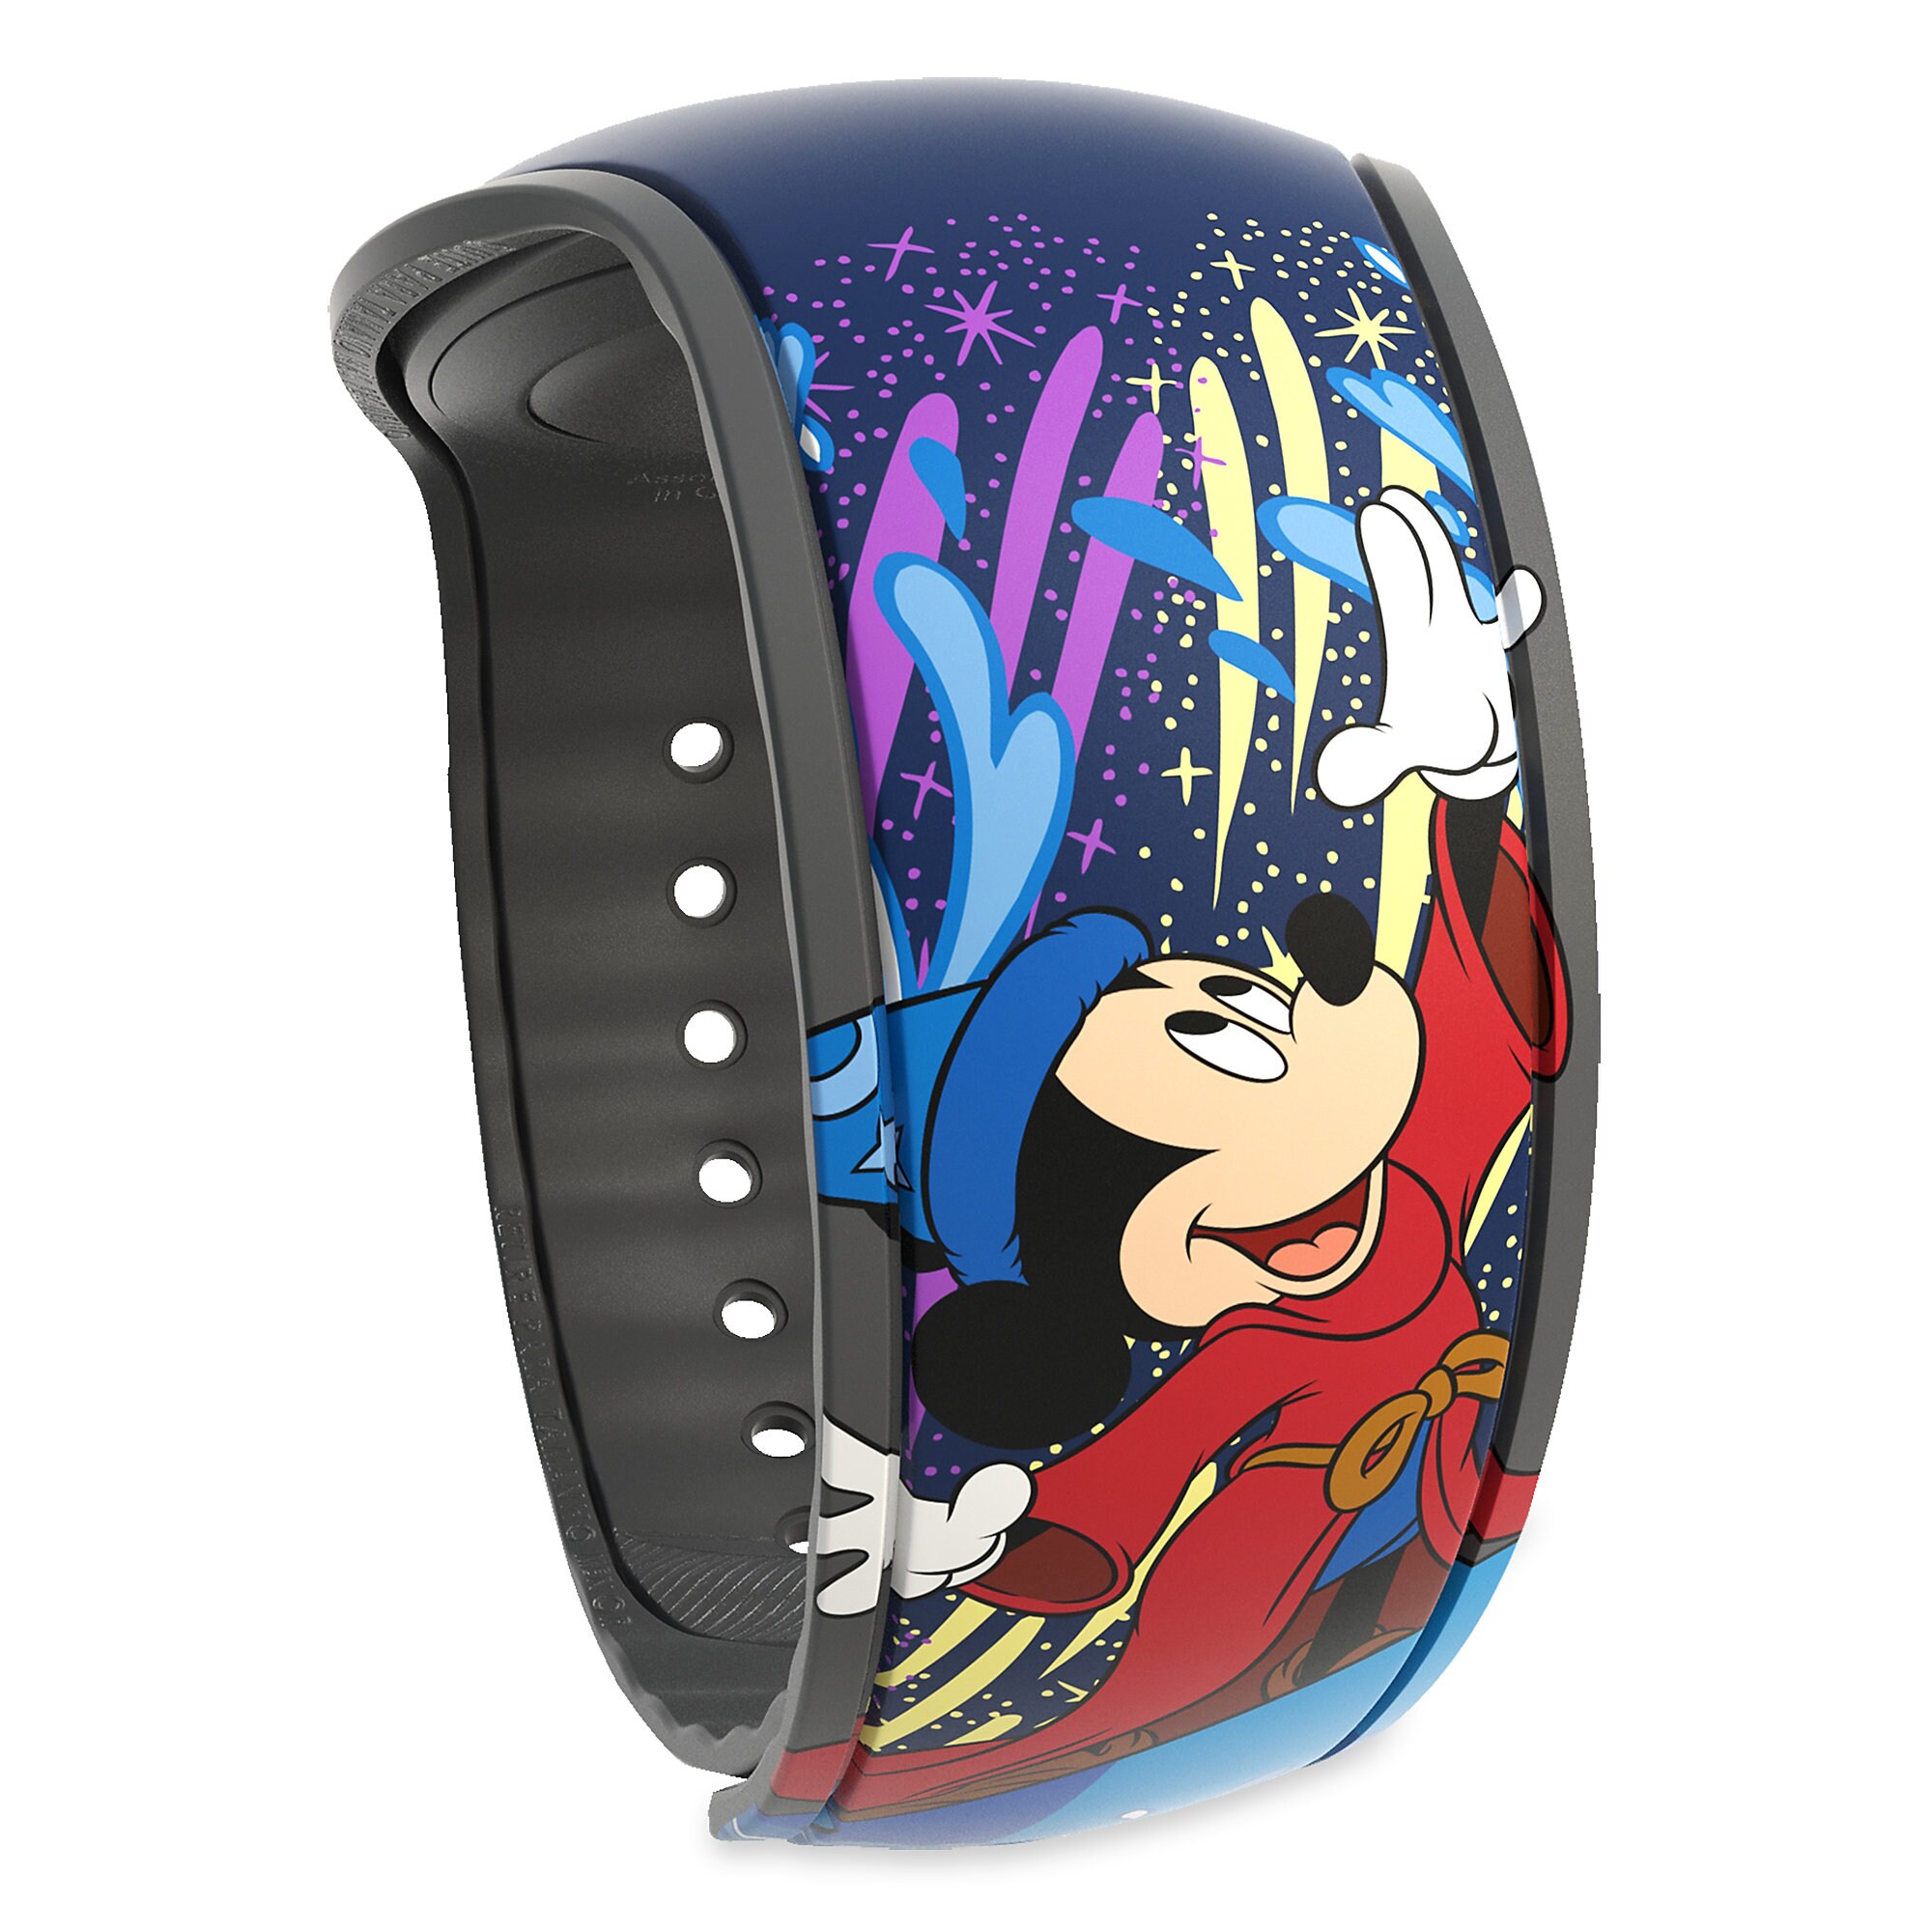 Sorcerer Mickey Mouse MagicBand 2 - Fantasia